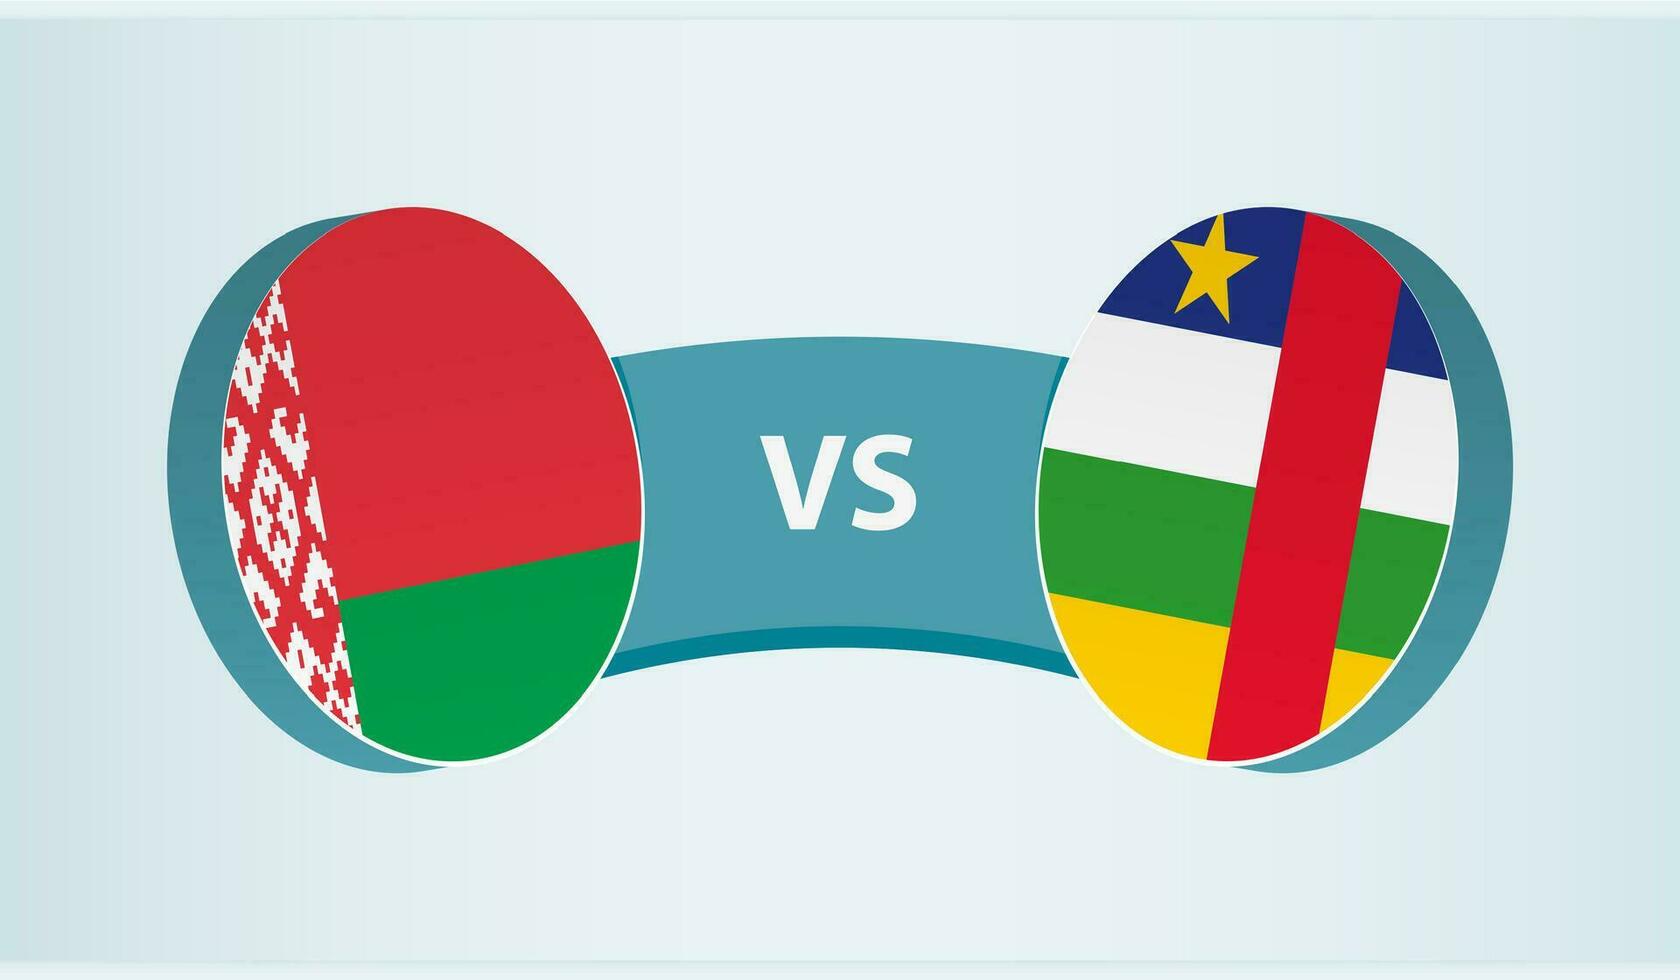 Belarus versus Central African Republic, team sports competition concept. vector